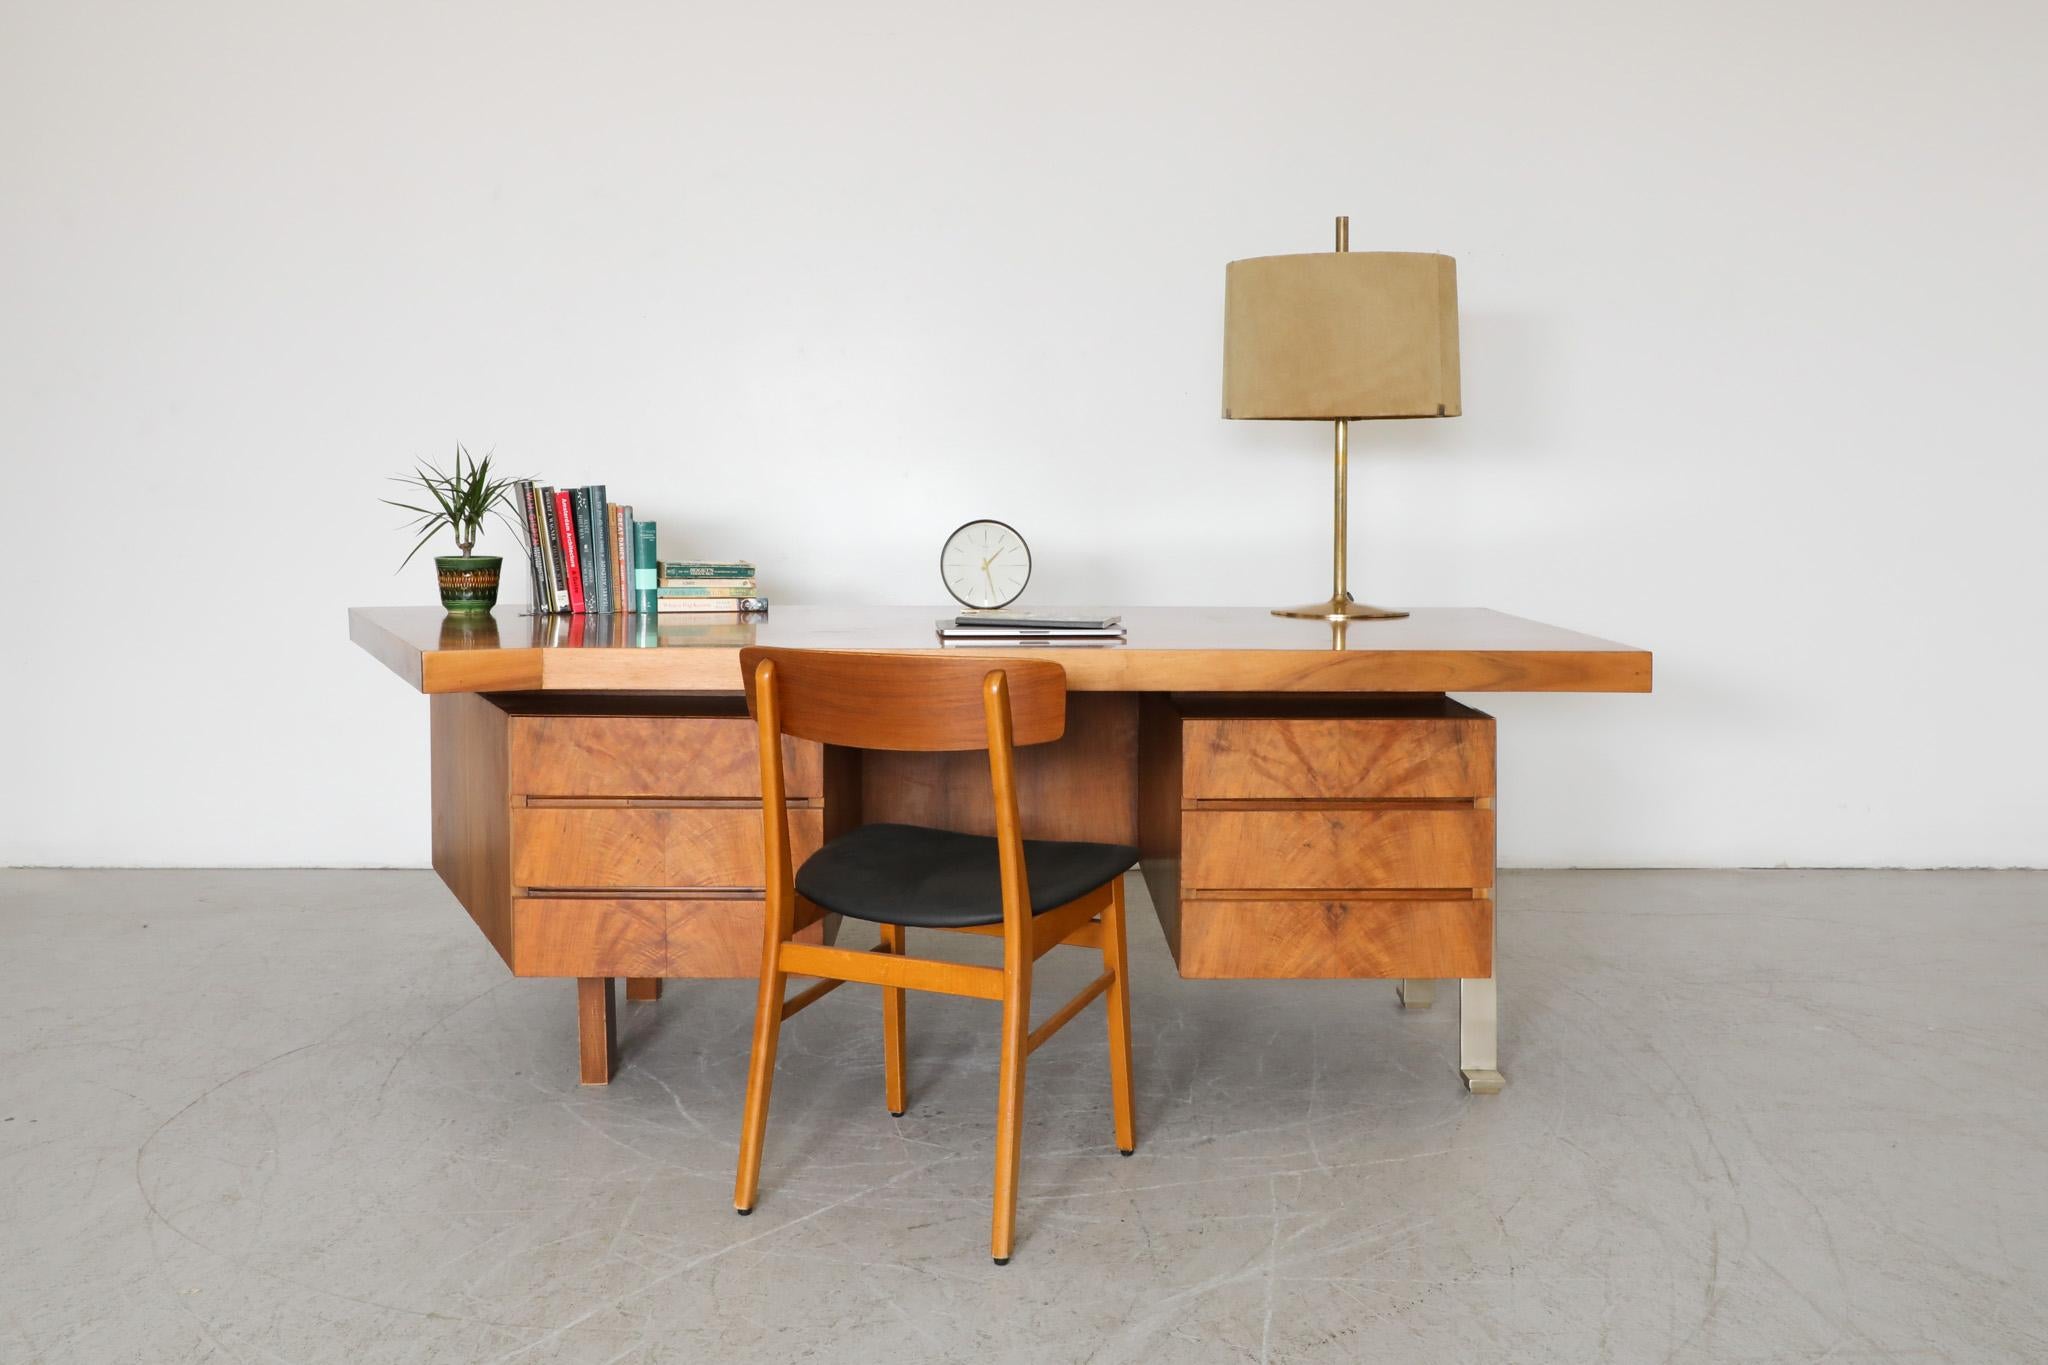 Handsome, Mid-Century, most likely custom made Executive desk with flat faced drawers and uniquely angled top. One side has aluminum legs in a similar design to Poul Kjaerholm's style, the other side is supported by 2 chunky wood legs, privacy